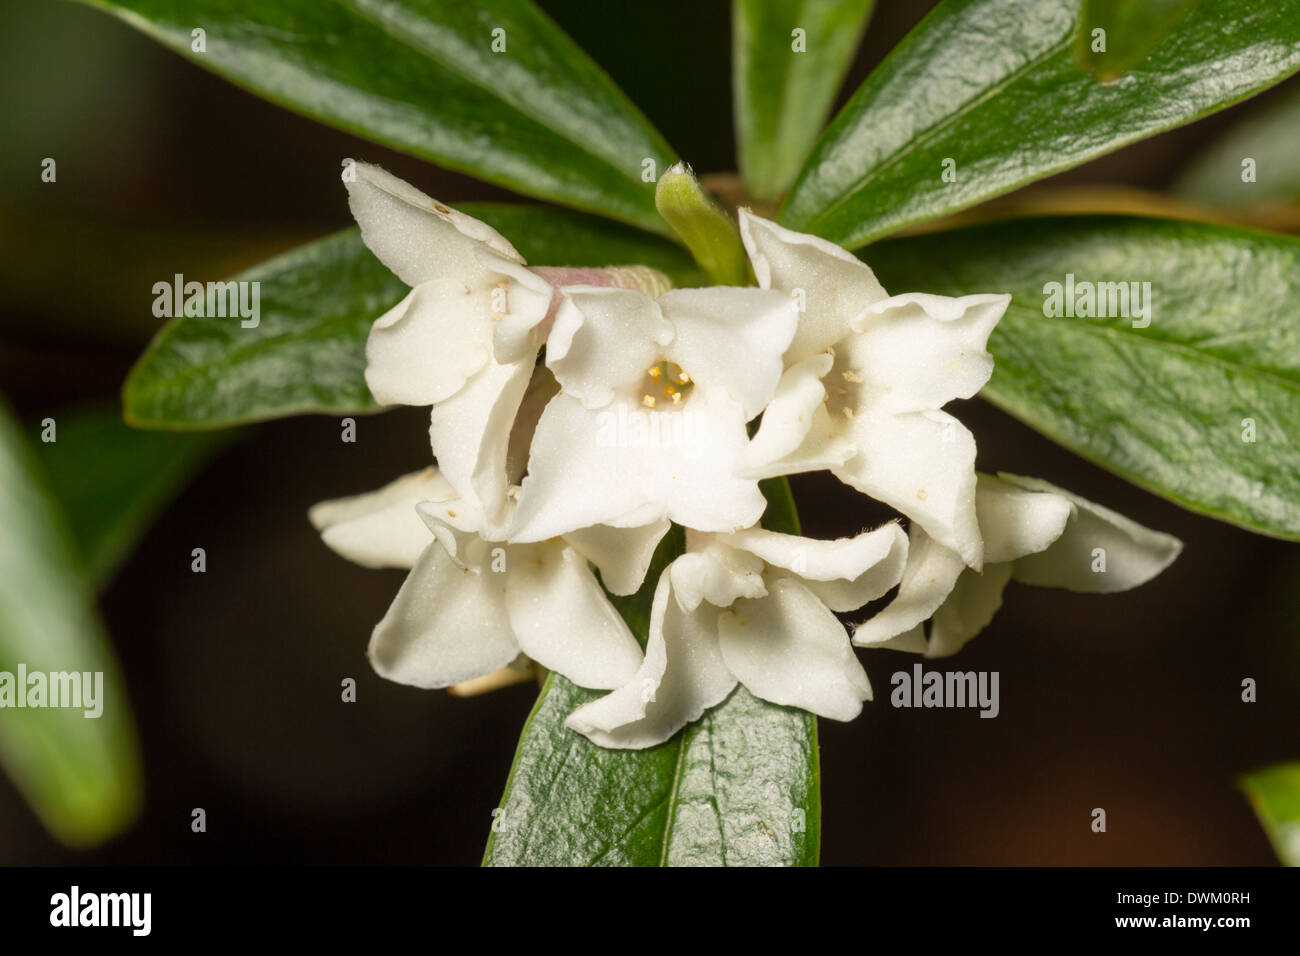 Close up of the heavily scented white form of Daphne bholua 'Alba' Stock Photo